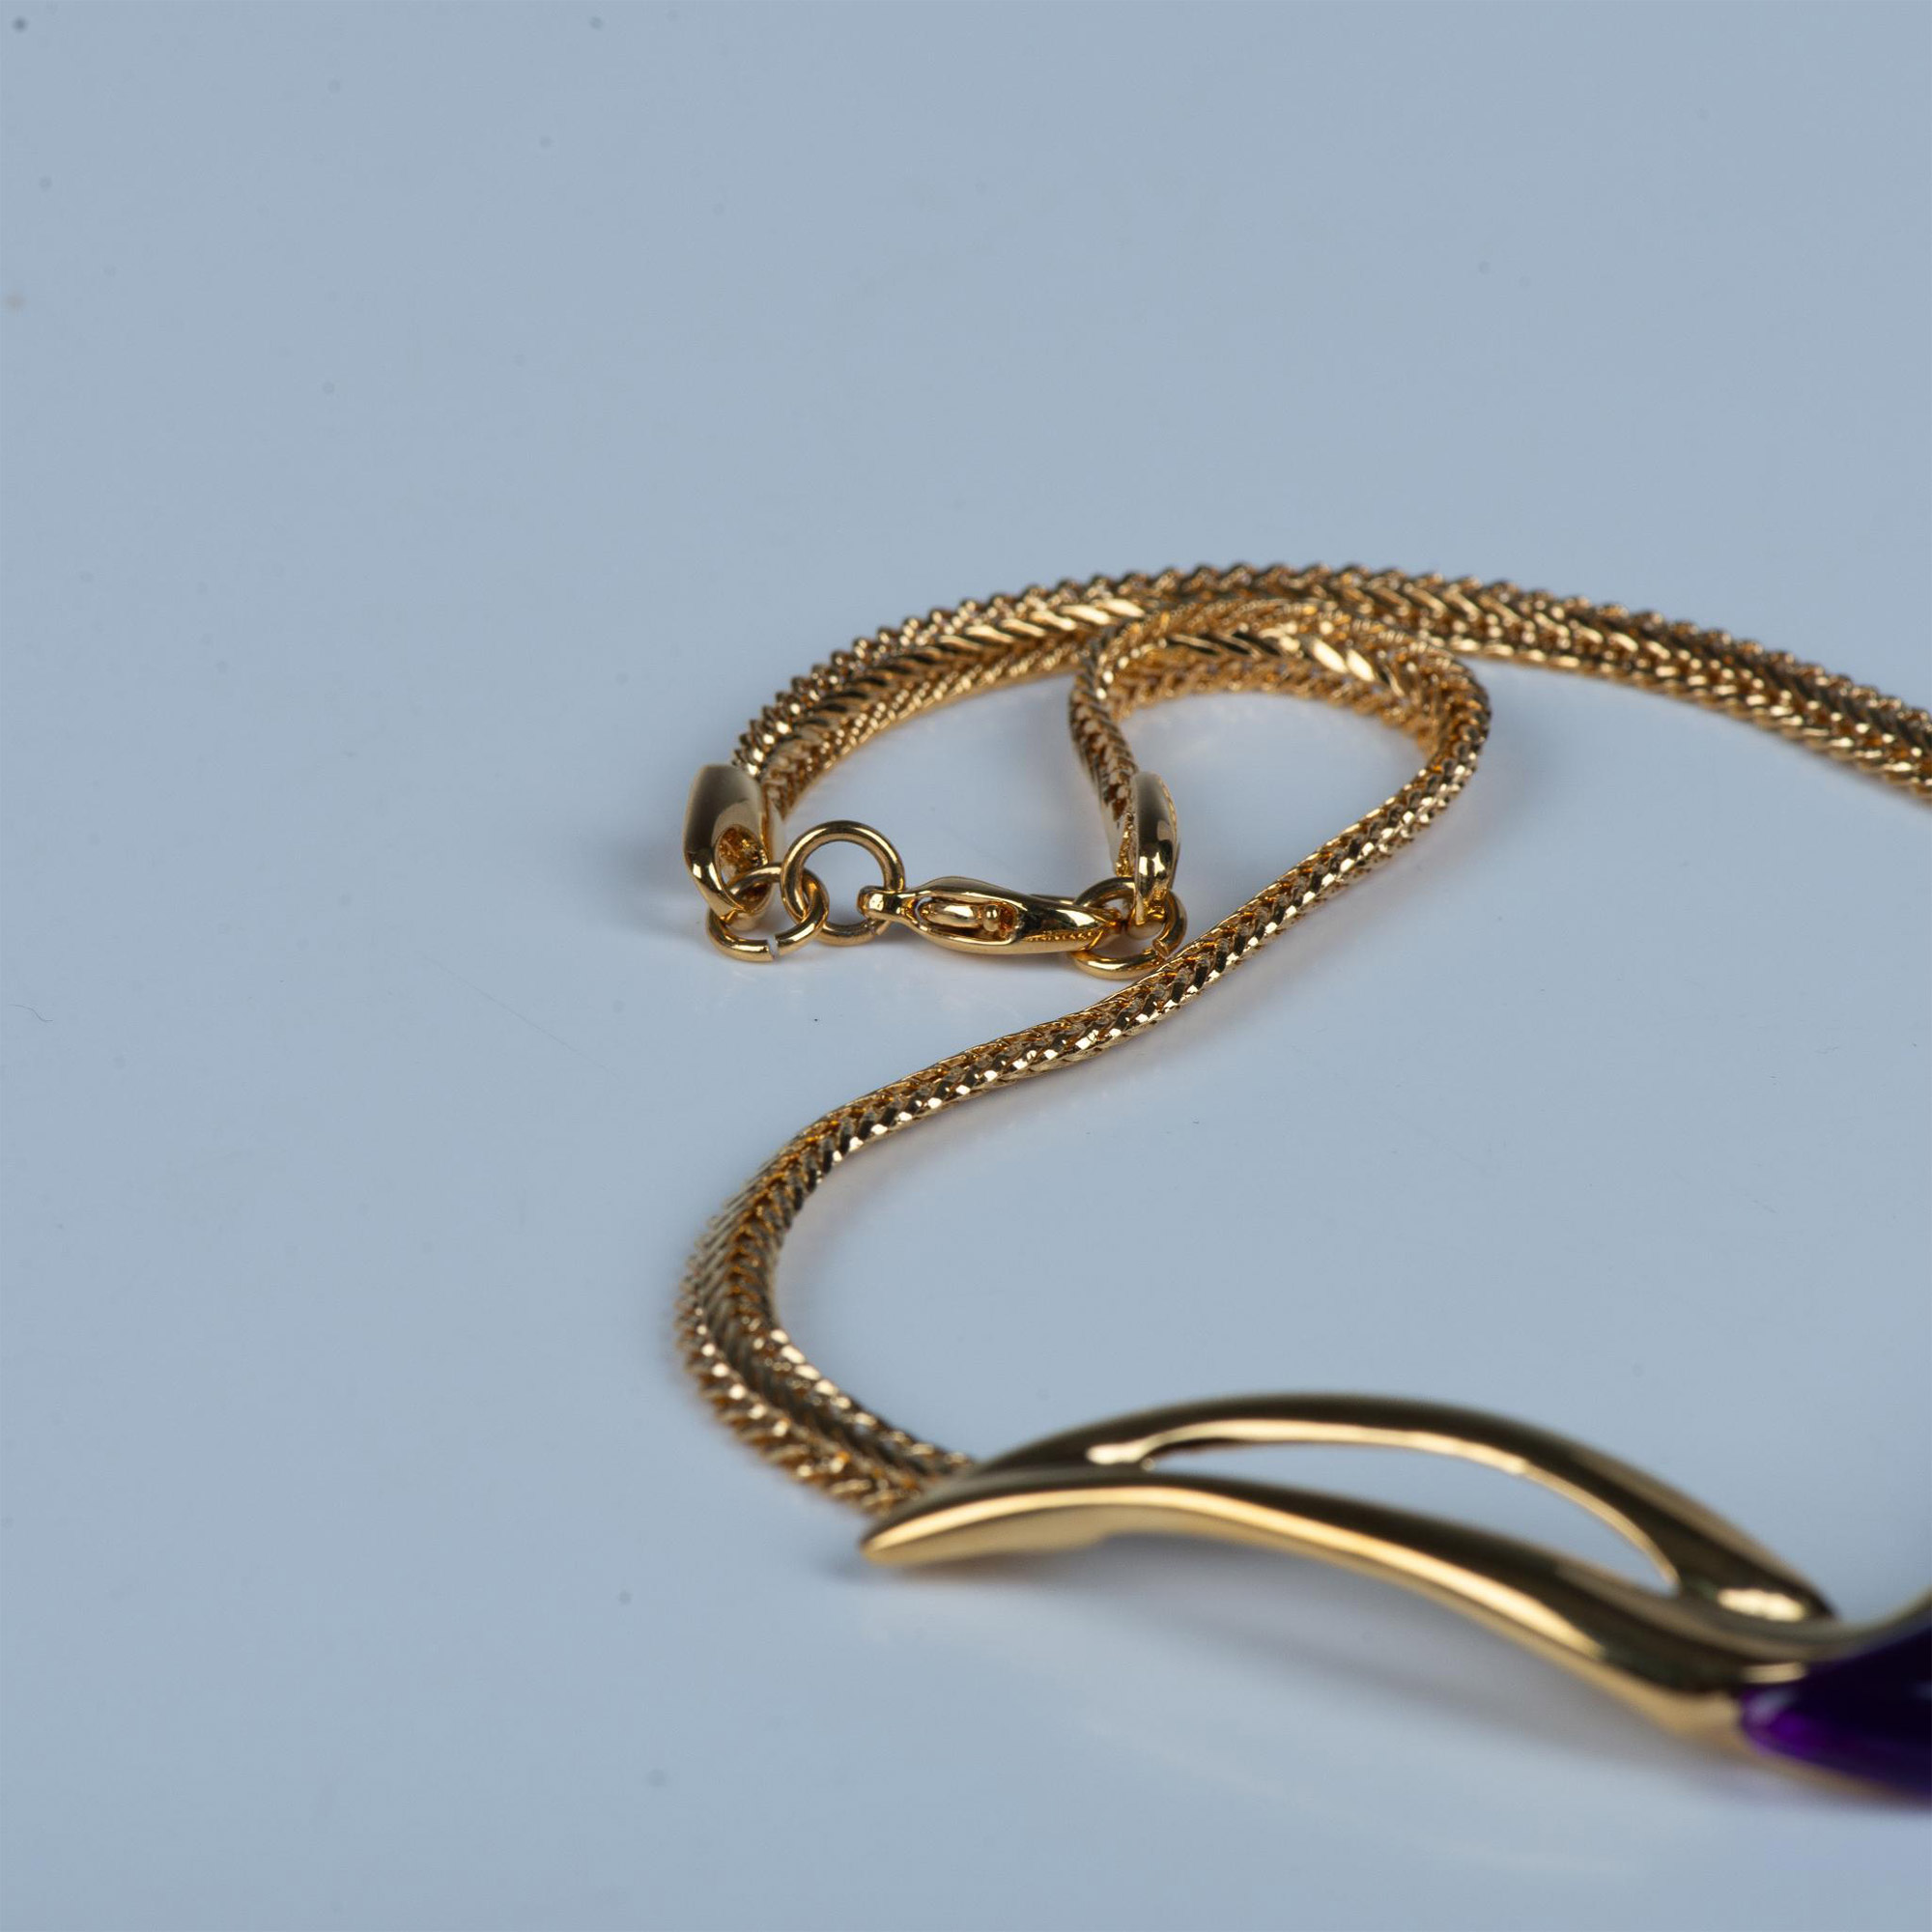 1980's Park Lane Purple Lucite and Goldtone Metal Necklace - Image 3 of 4